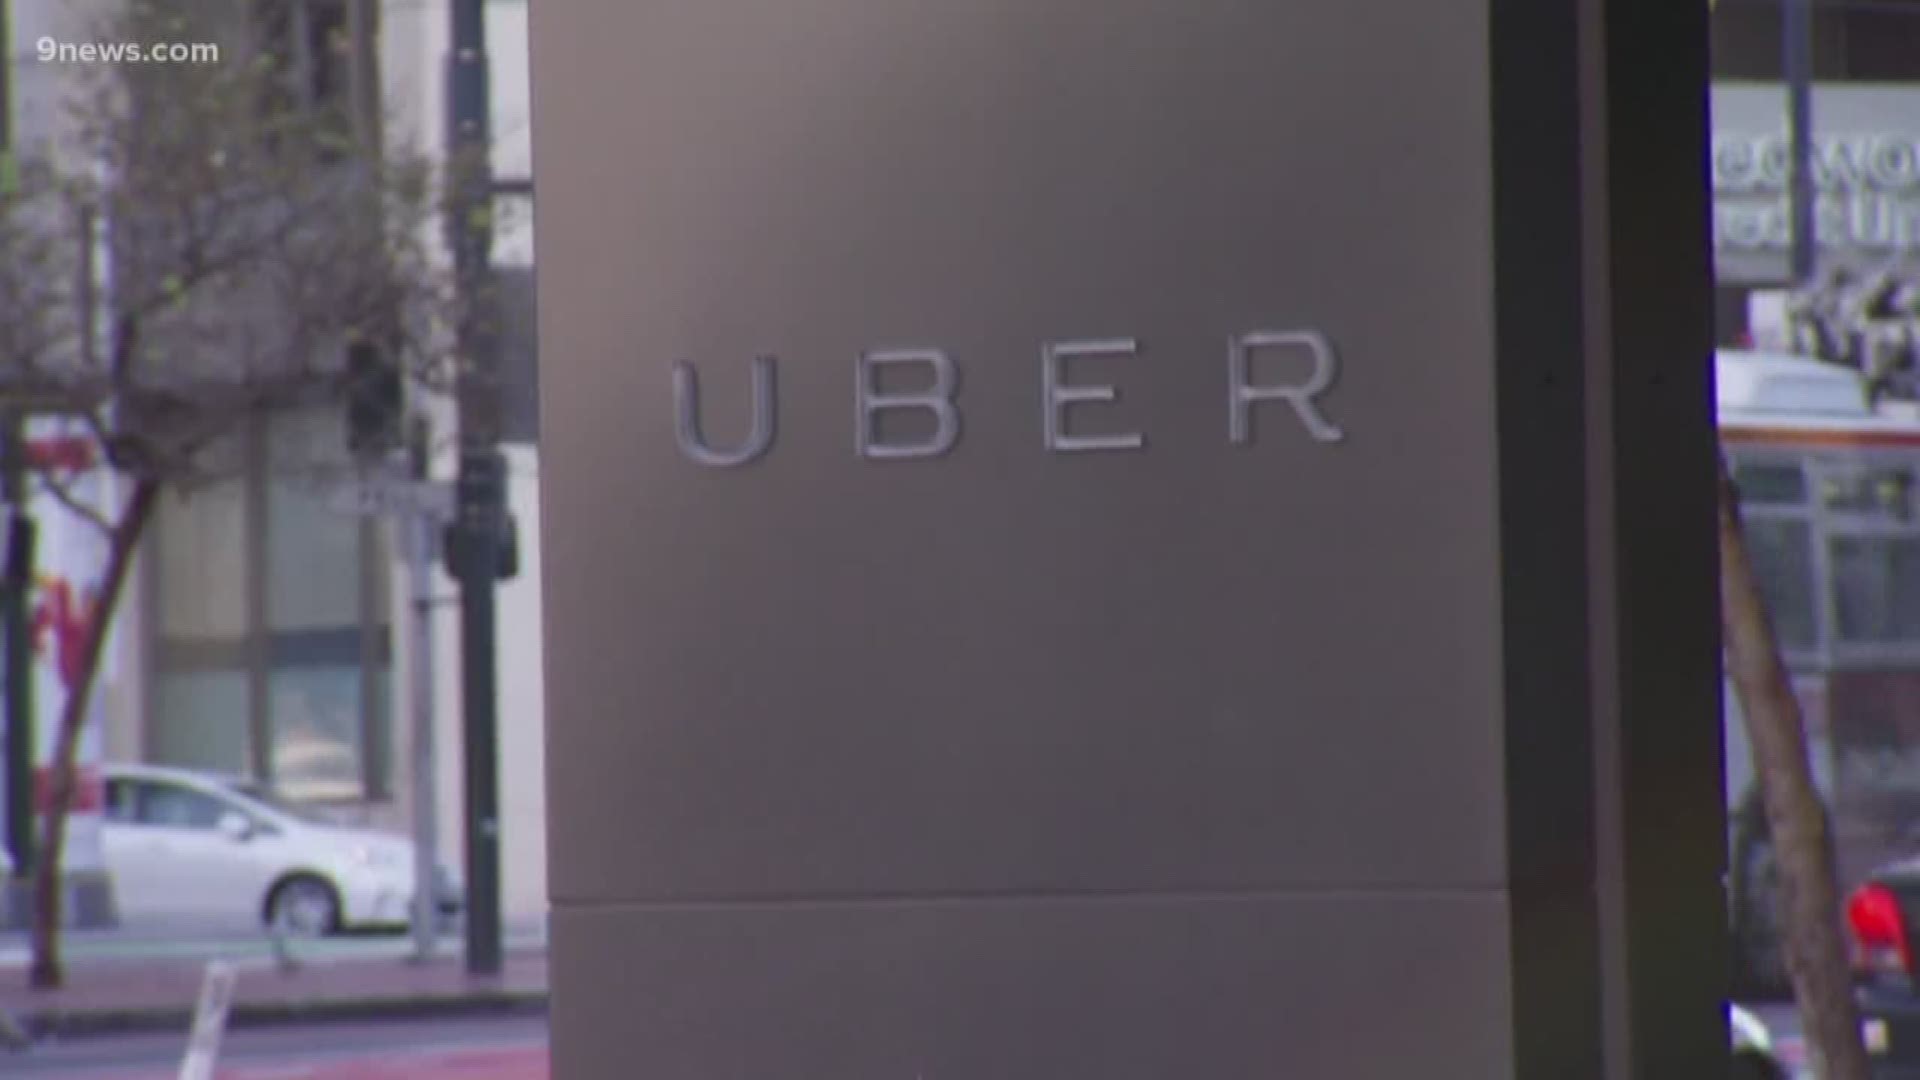 n investigation found that over the last year and a half, 57 Uber drivers were giving rides who should not have been permitted to drive for the company, according to a news release from the Colorado Public Utilities Commission (PUC). 